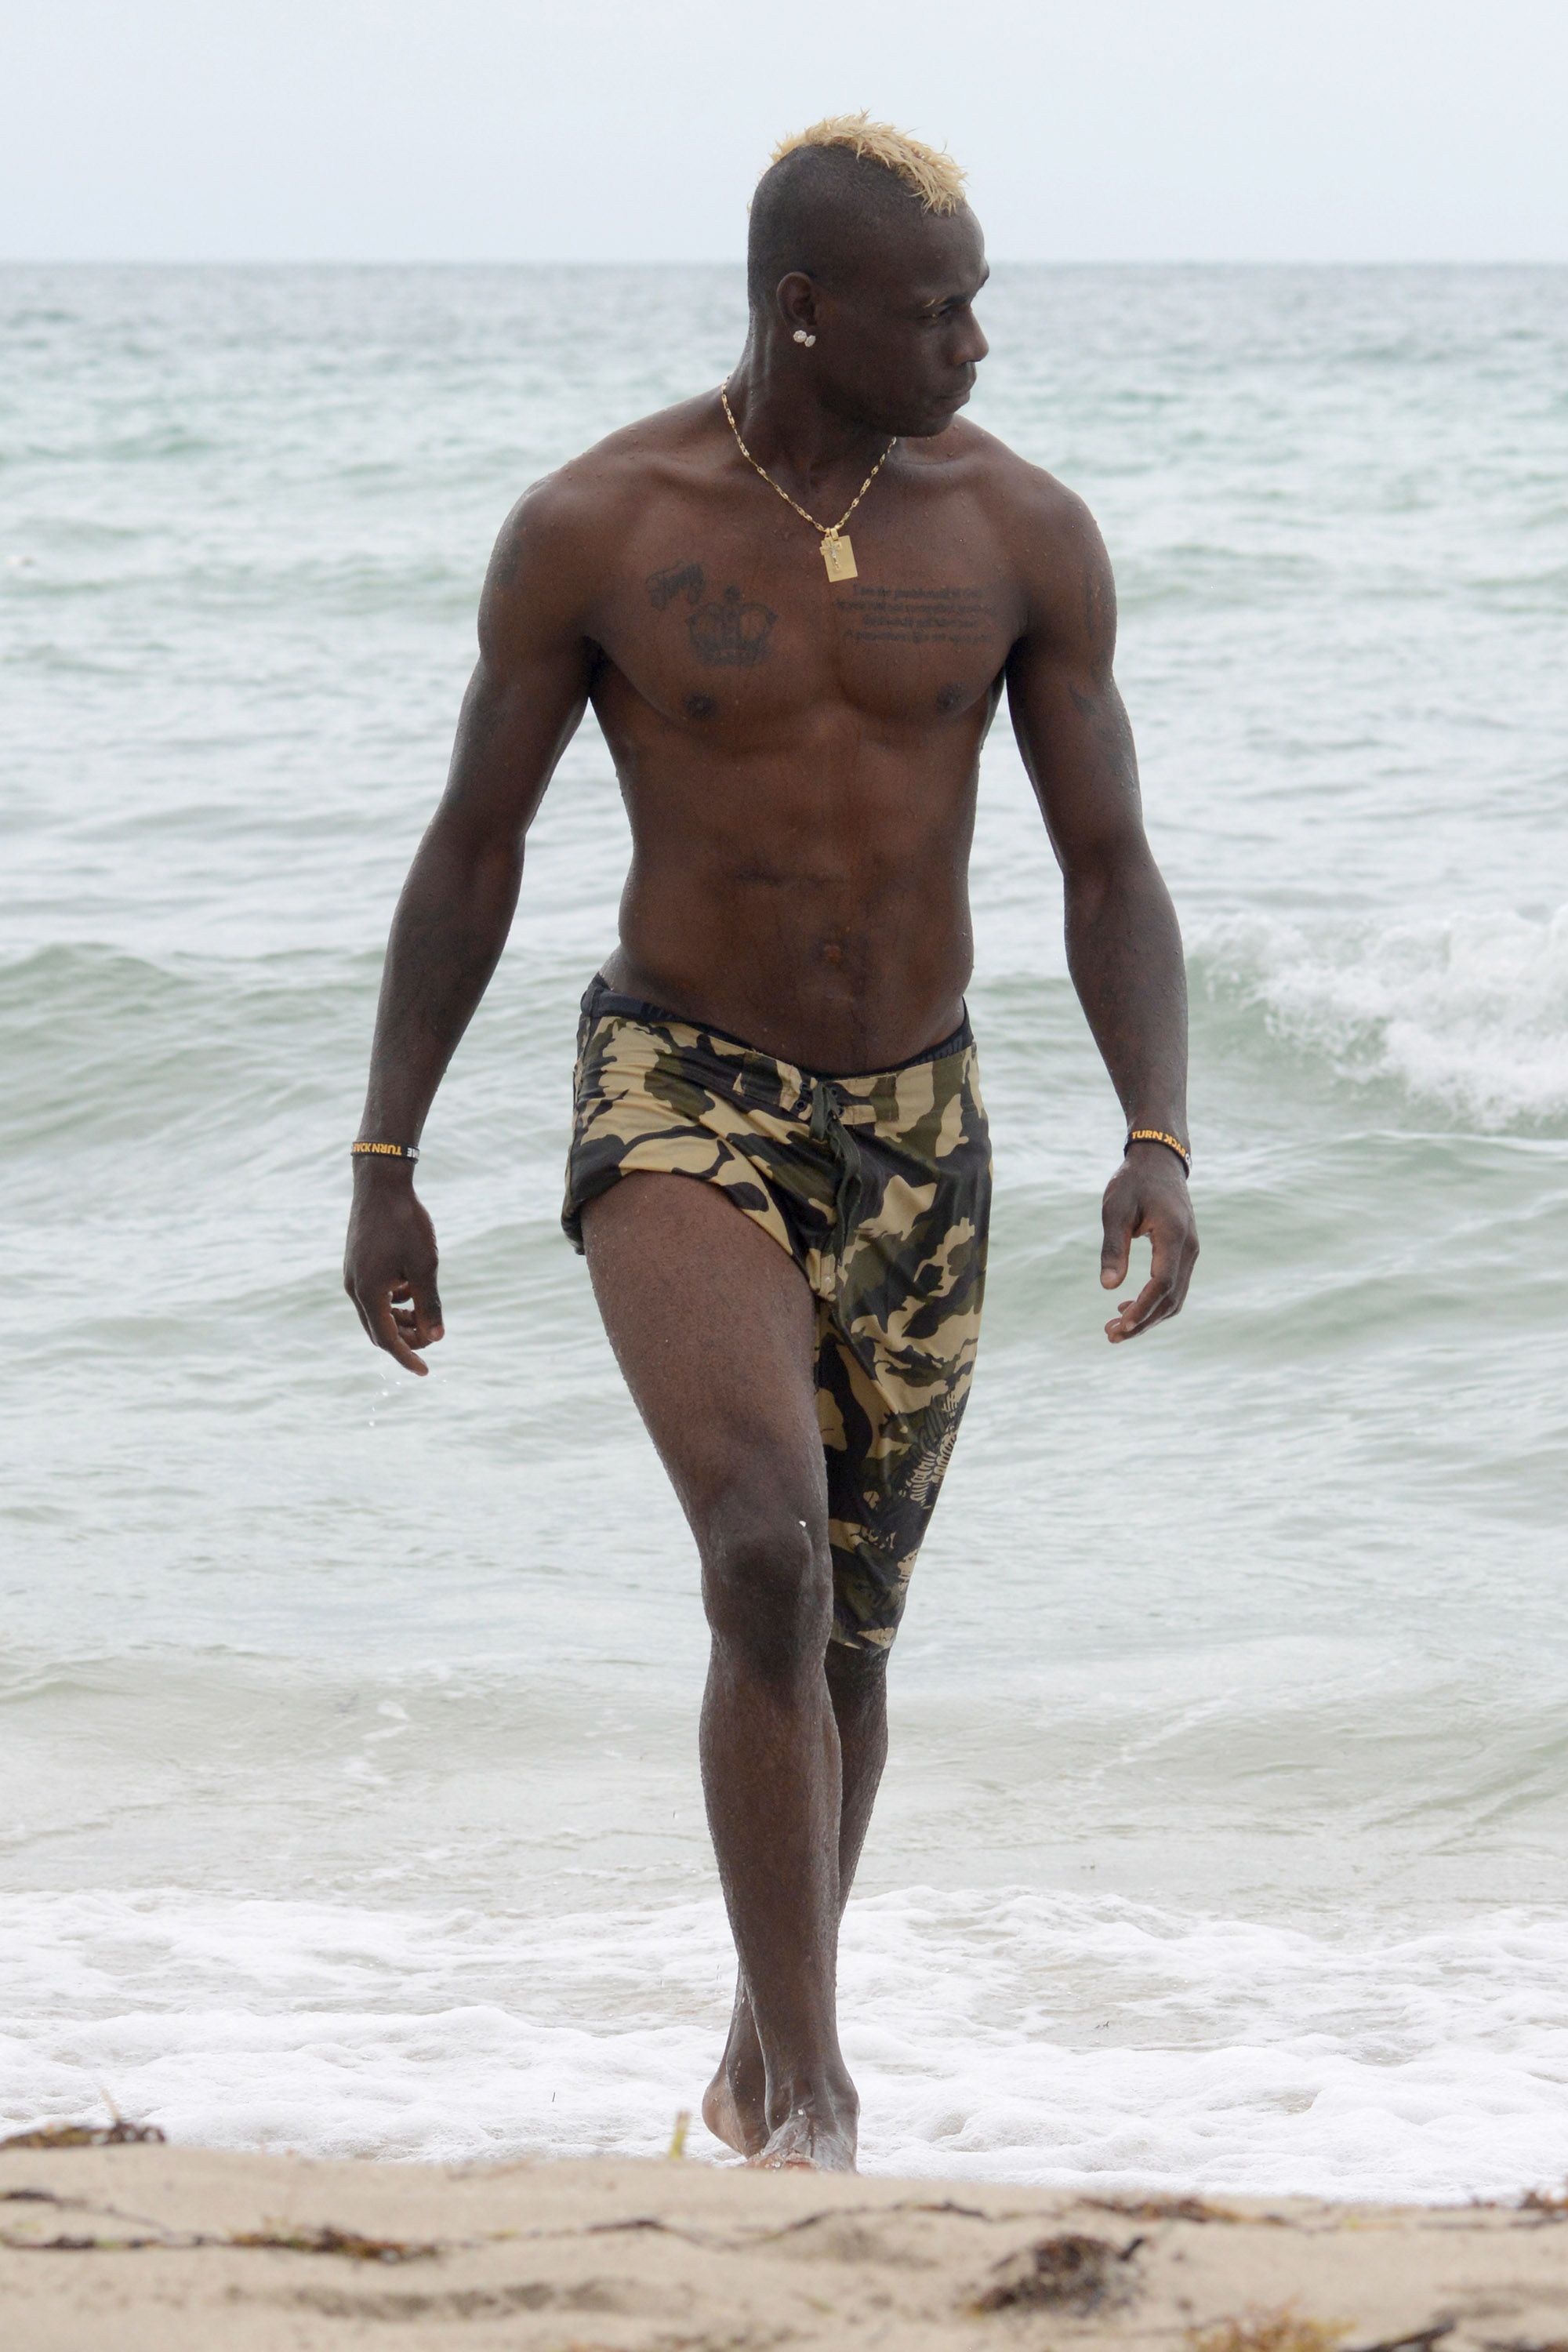 See Balotelli, Pirlo shirtless on the beach picture